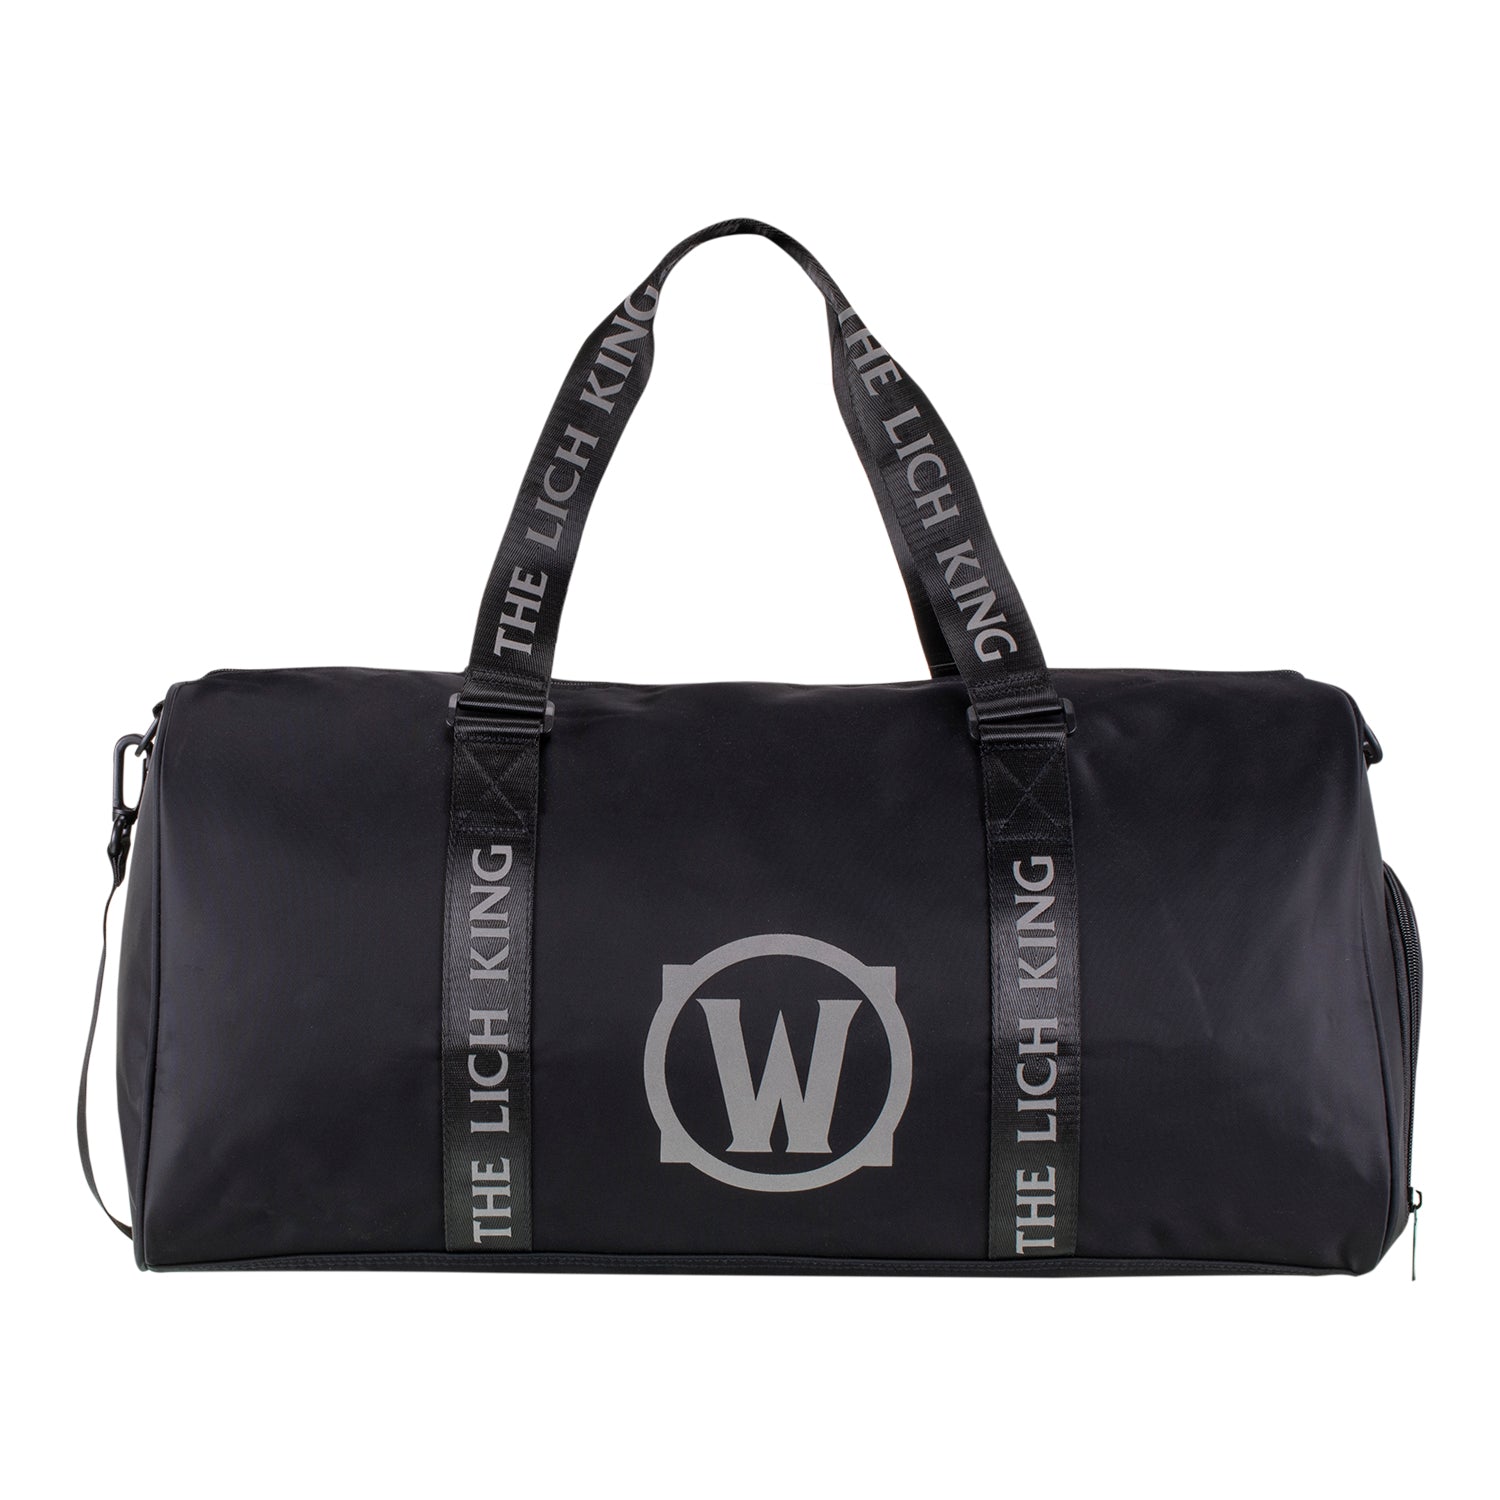 World of Warcraft Wrath of the Lich King Duffle Bag - Back View